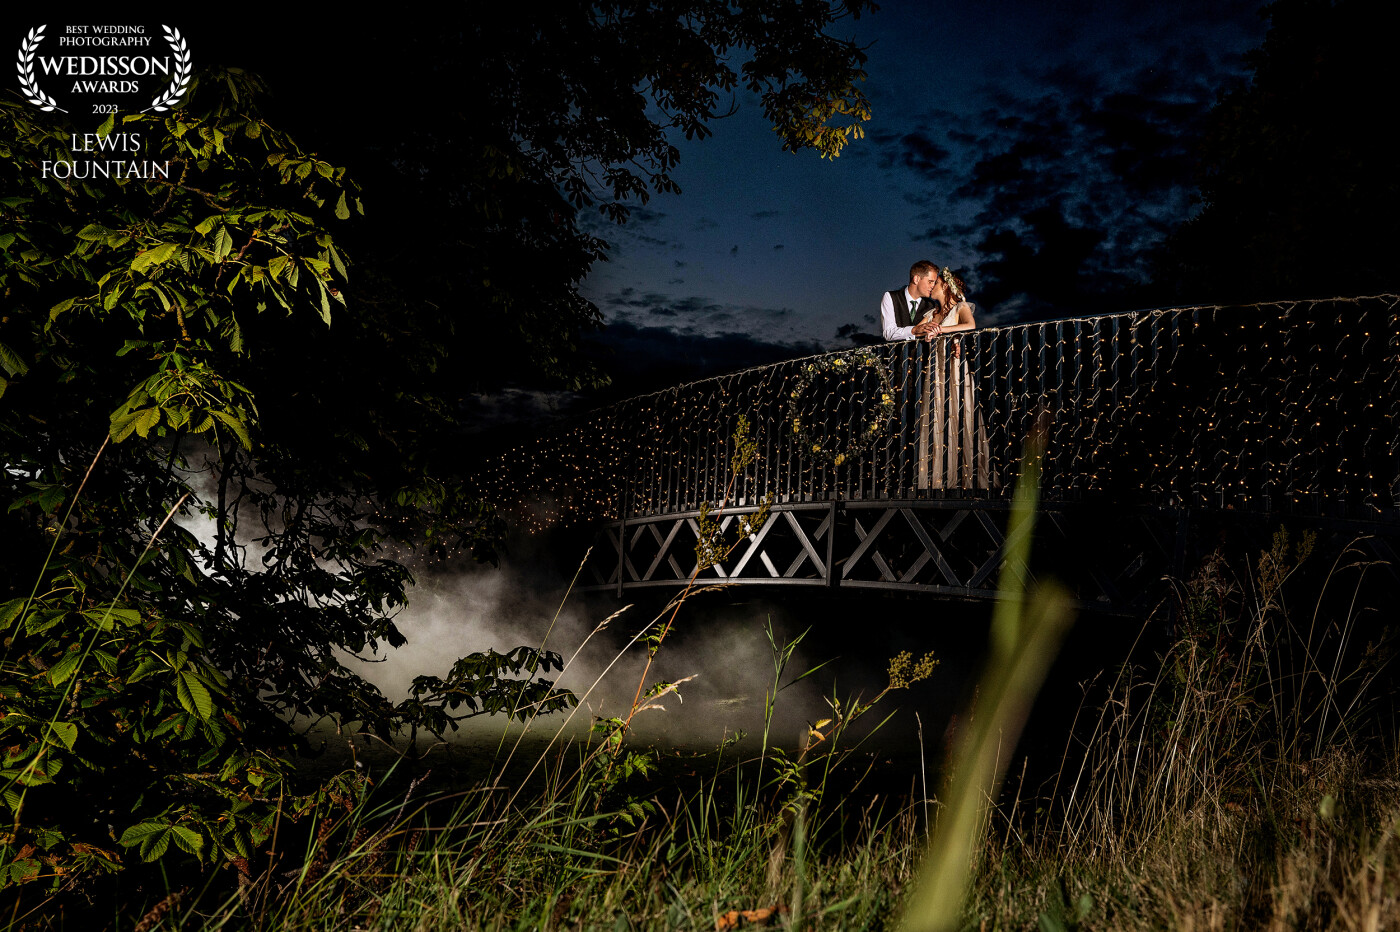 The is one of the main features at Bassmead Manor Barns, and every bride & groom requests a shot on the bridge! <br />
We see the same shot week in week out, the same angle, nothing new.<br />
We had an idea to create something different for Lauren & Dan, and with the use of four carefully placed lights, two smoke grenades and some helpful groomsmen, we created something unique!